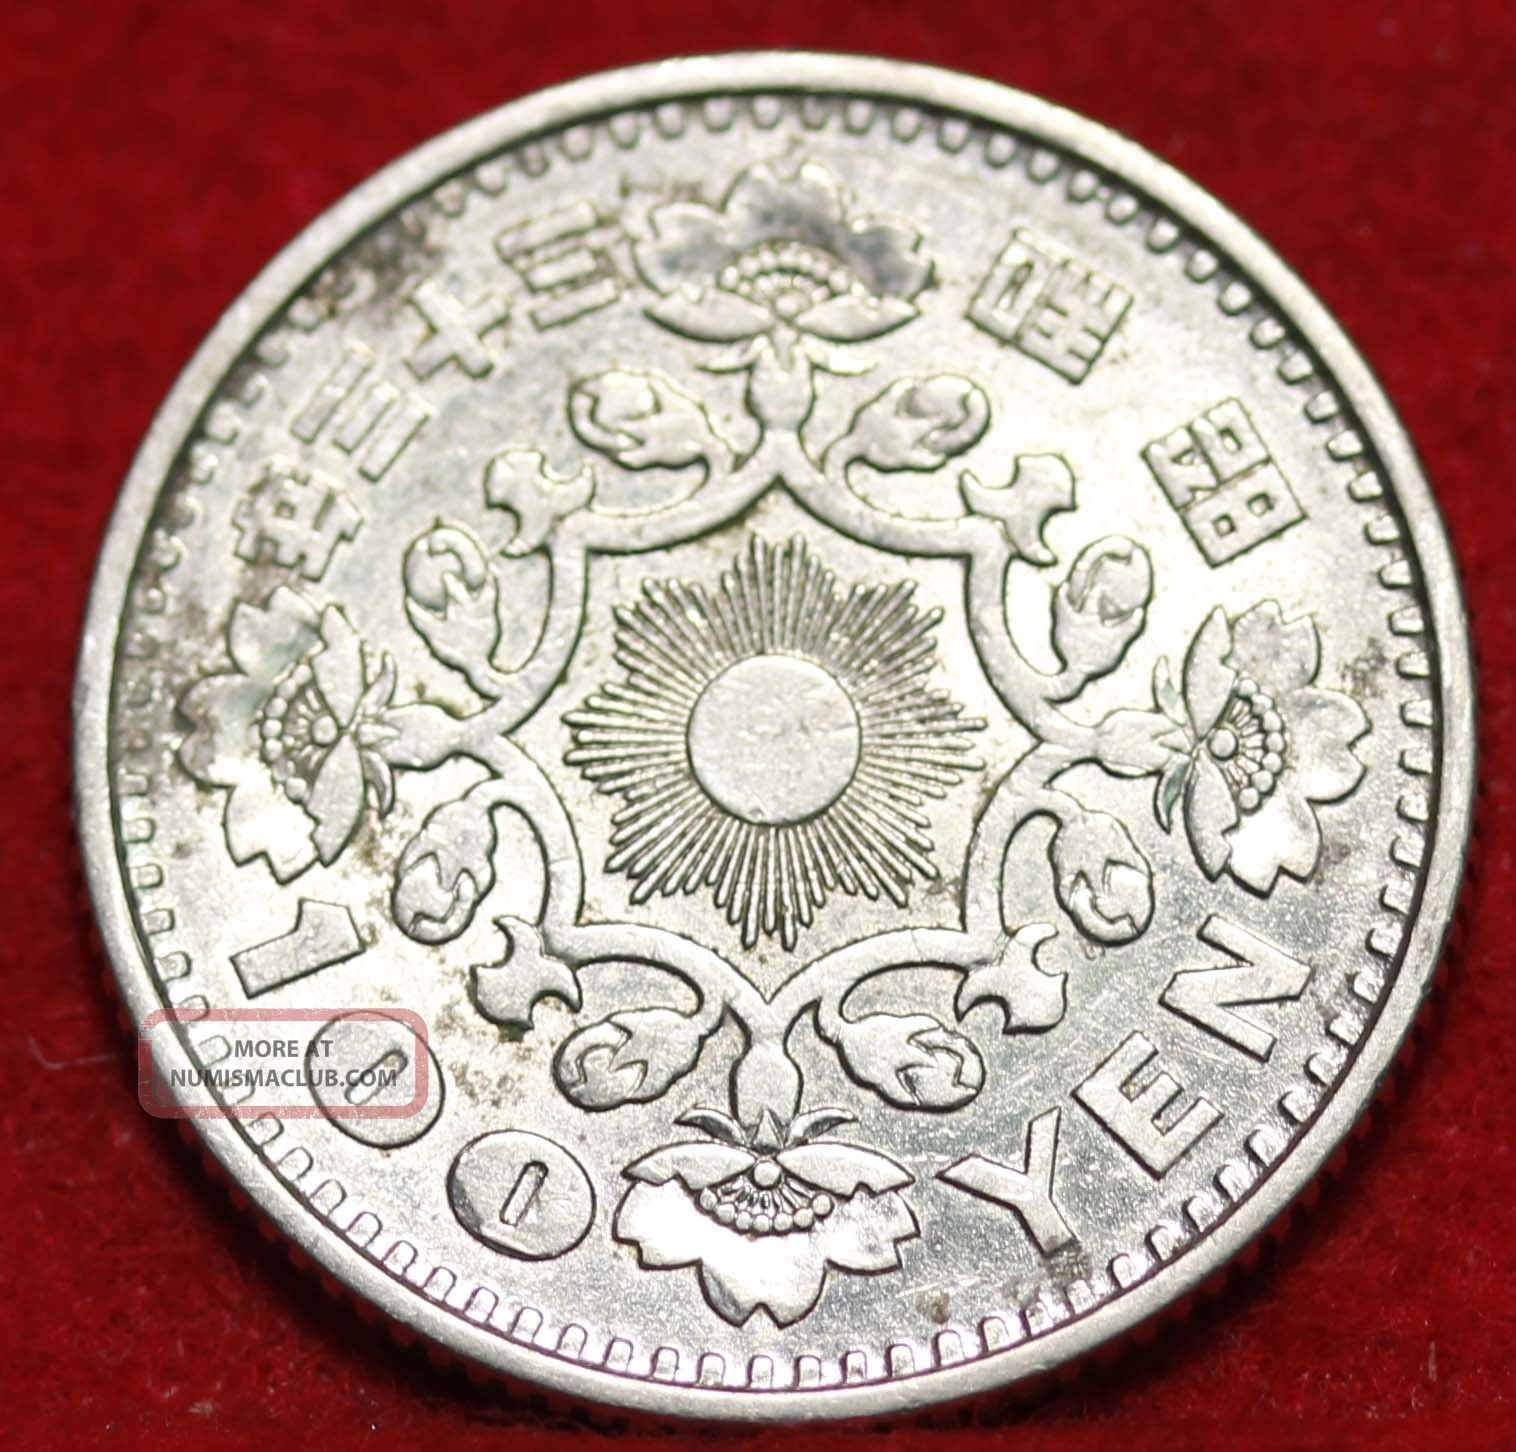 Japan 100 Yen Silver Foreign Coin S/h